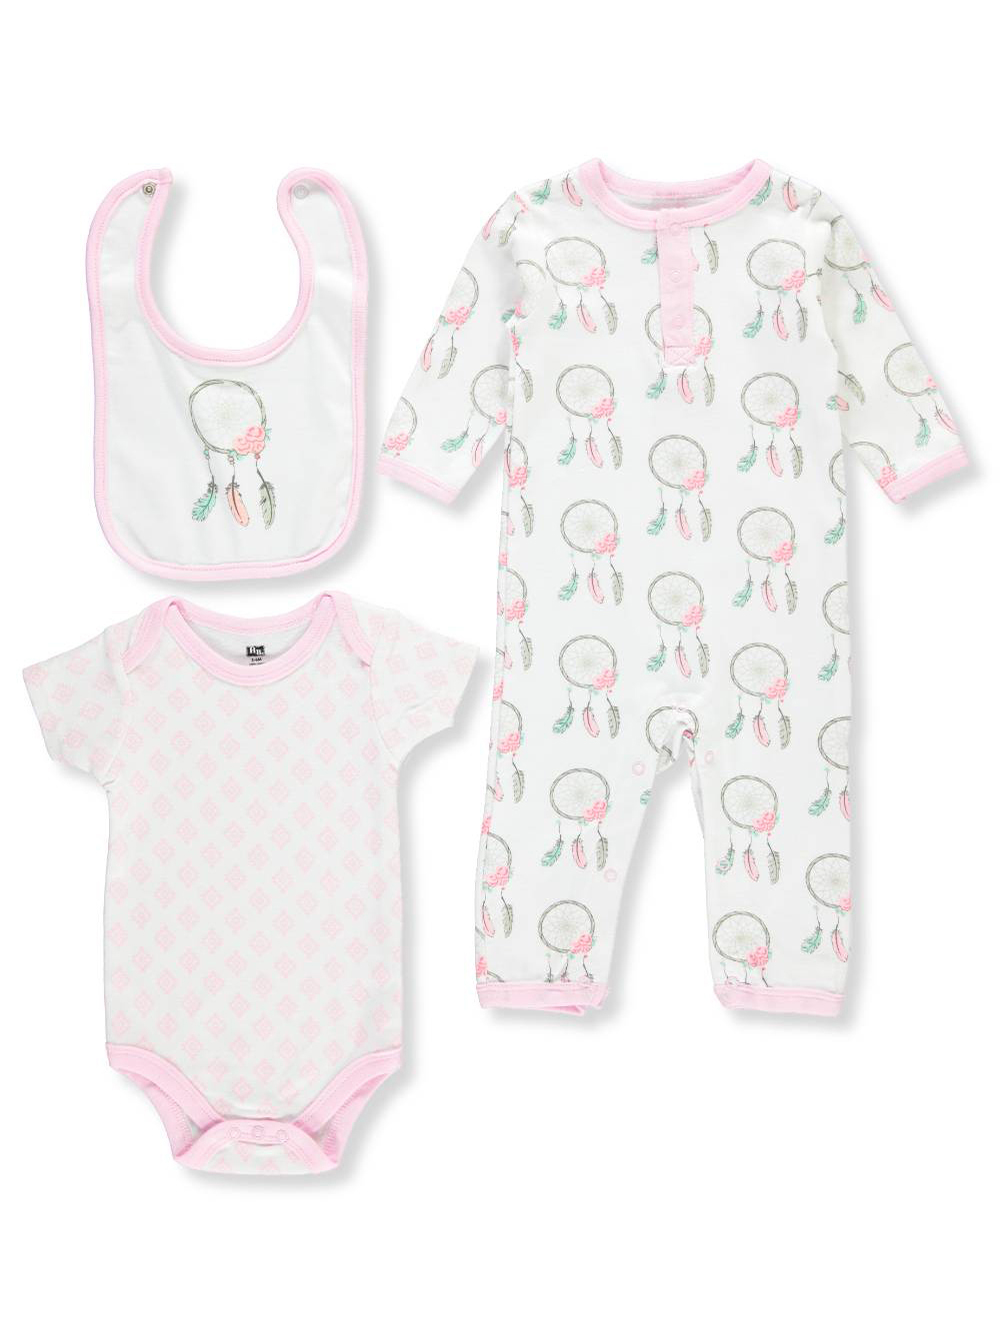 Gift Sets Baby 3-Piece Set